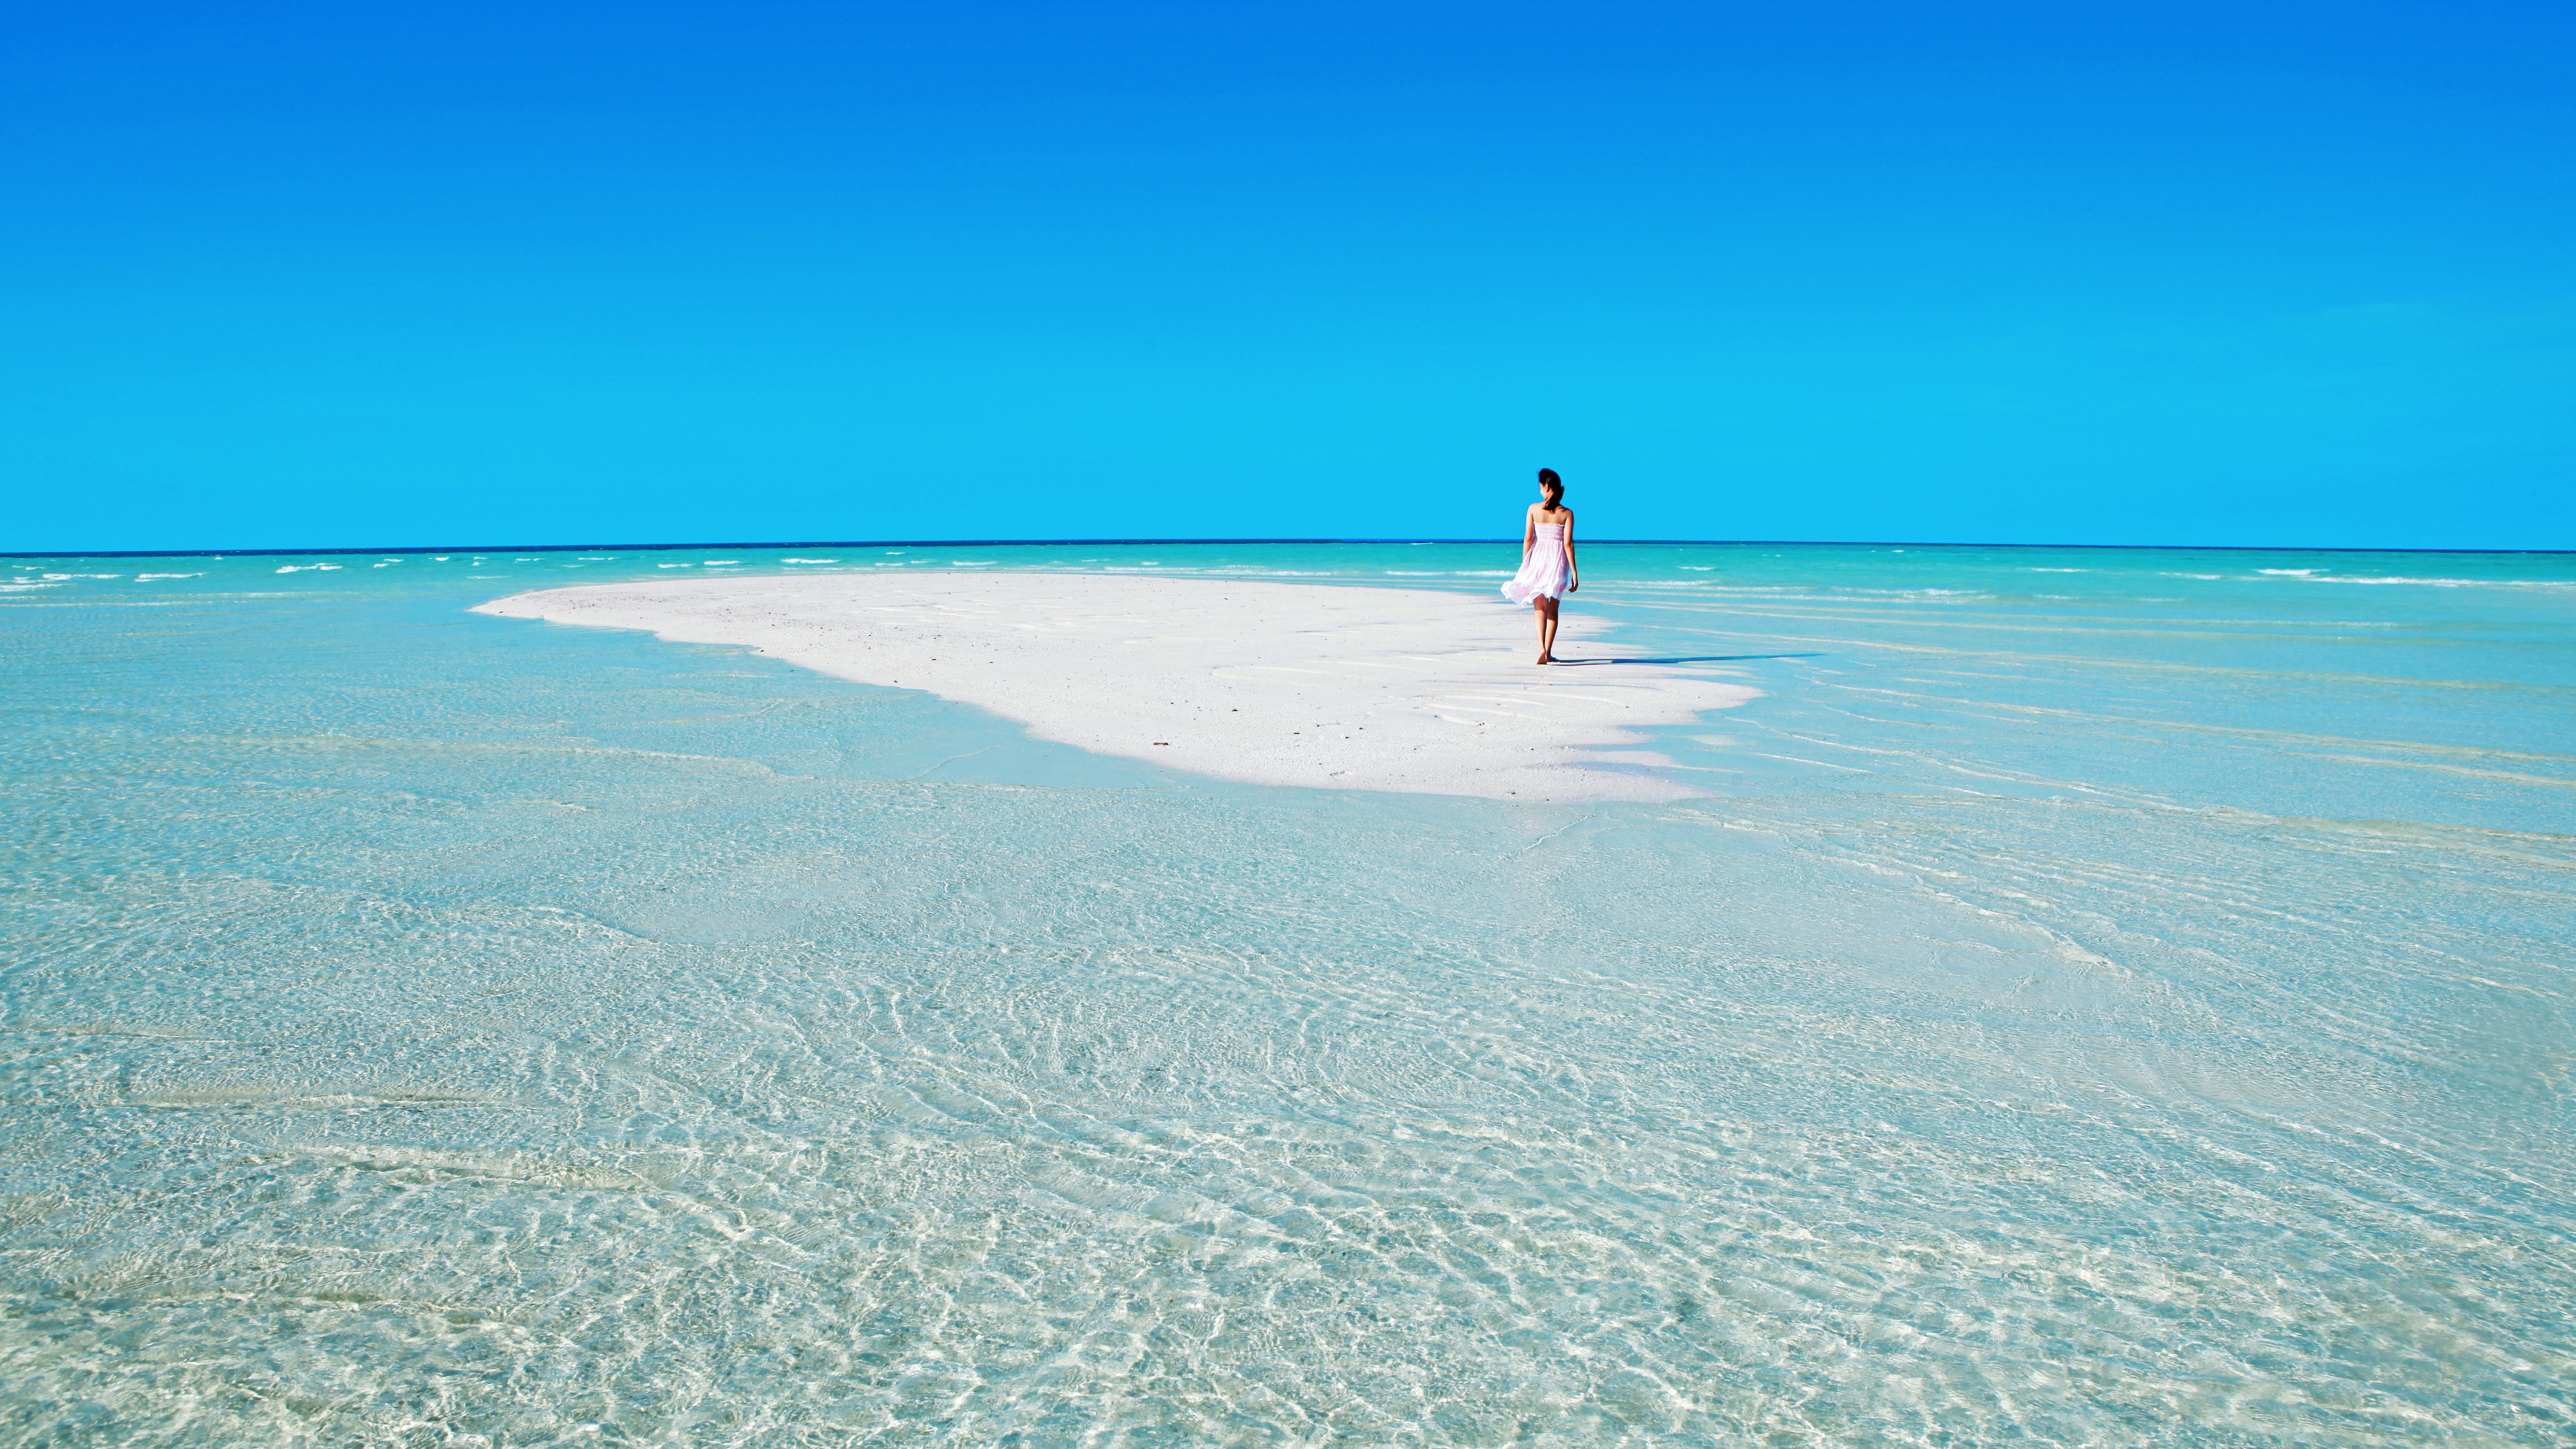 Woman in White Shirt Walking on Beach During Daytime. Wallpaper in 3840x2160 Resolution